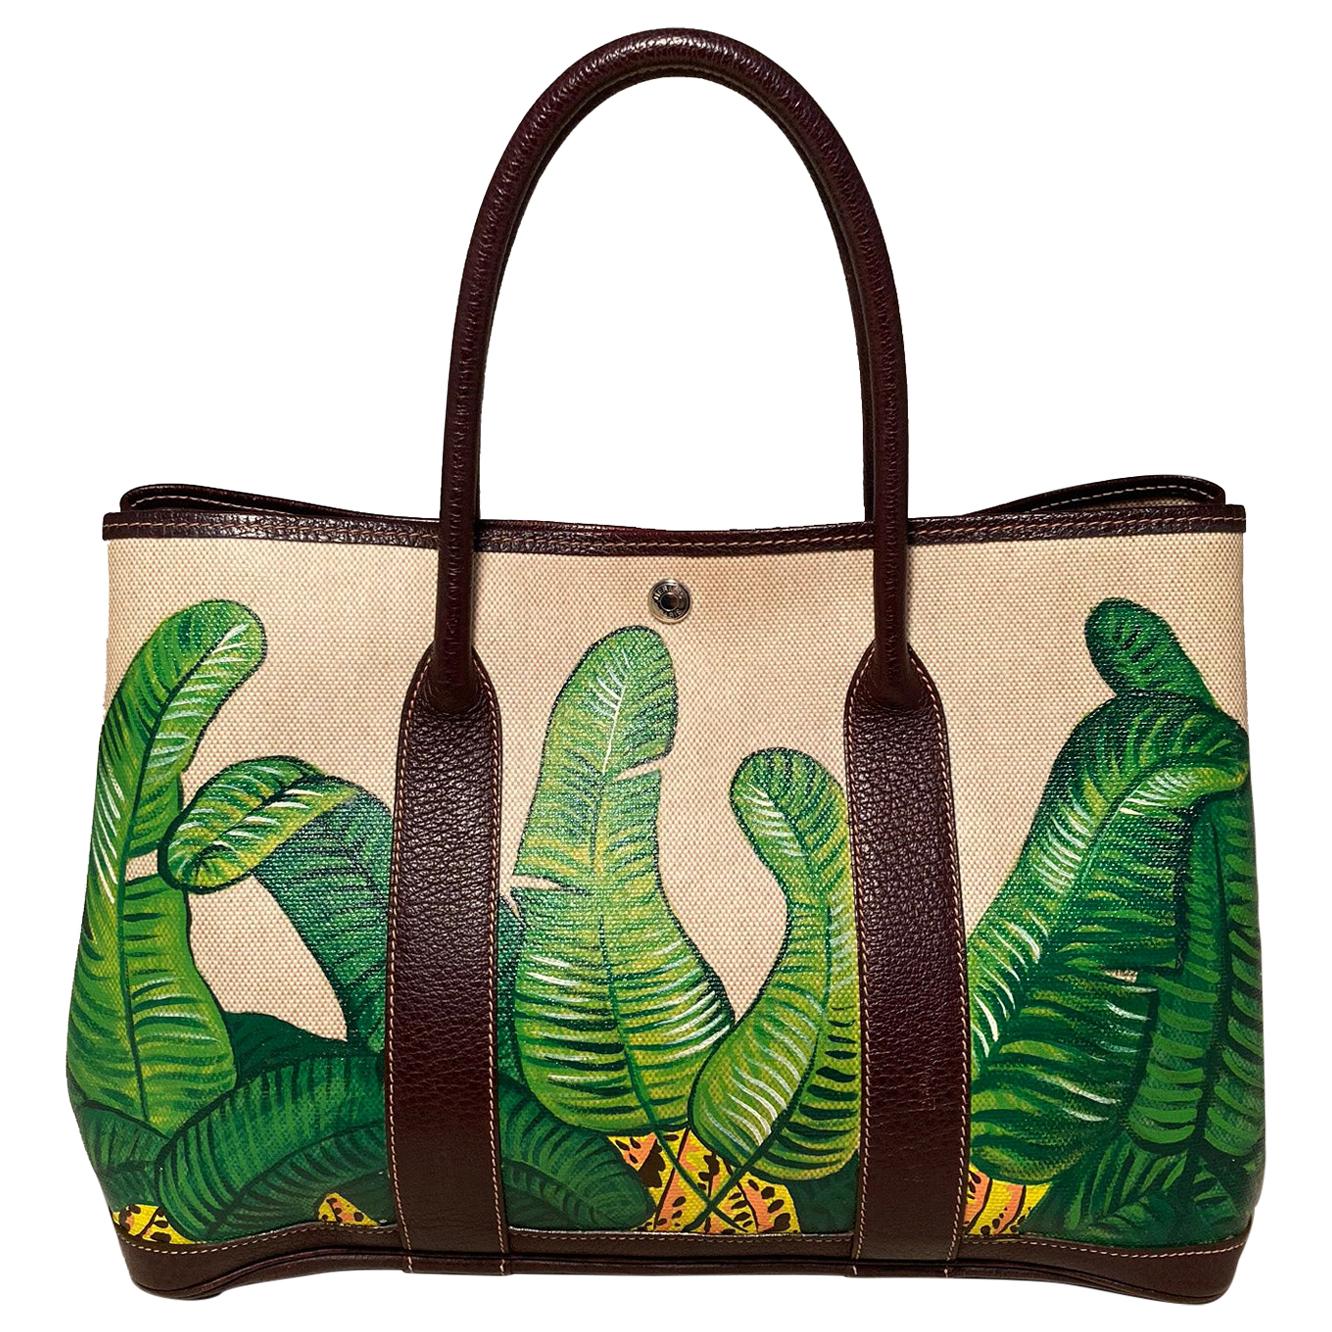 Hermes Pointillism Hand Painted Garden Party 35 Tote